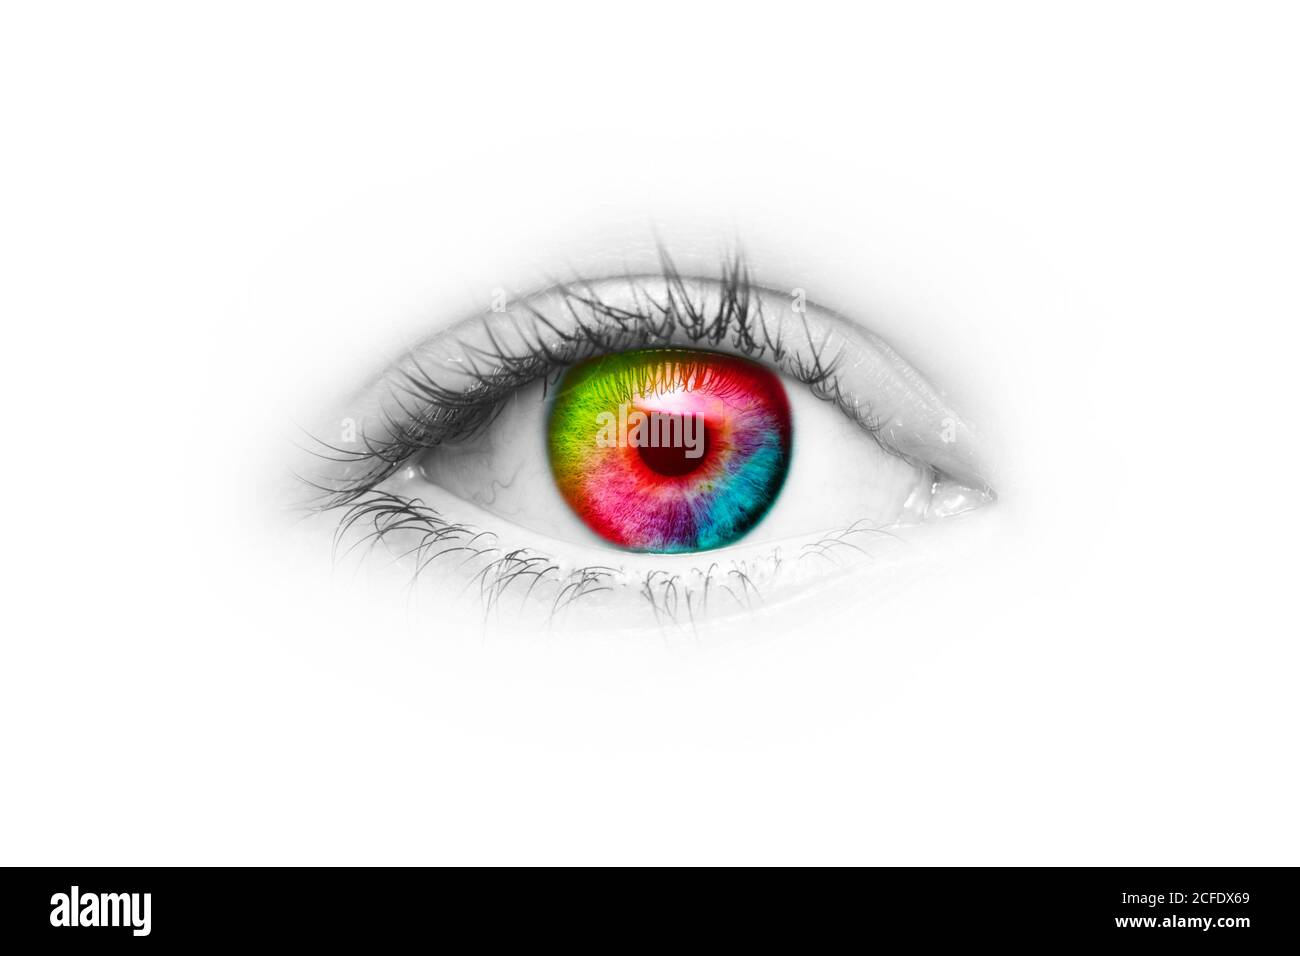 Eye with pupil in rainbow colors Stock Photo